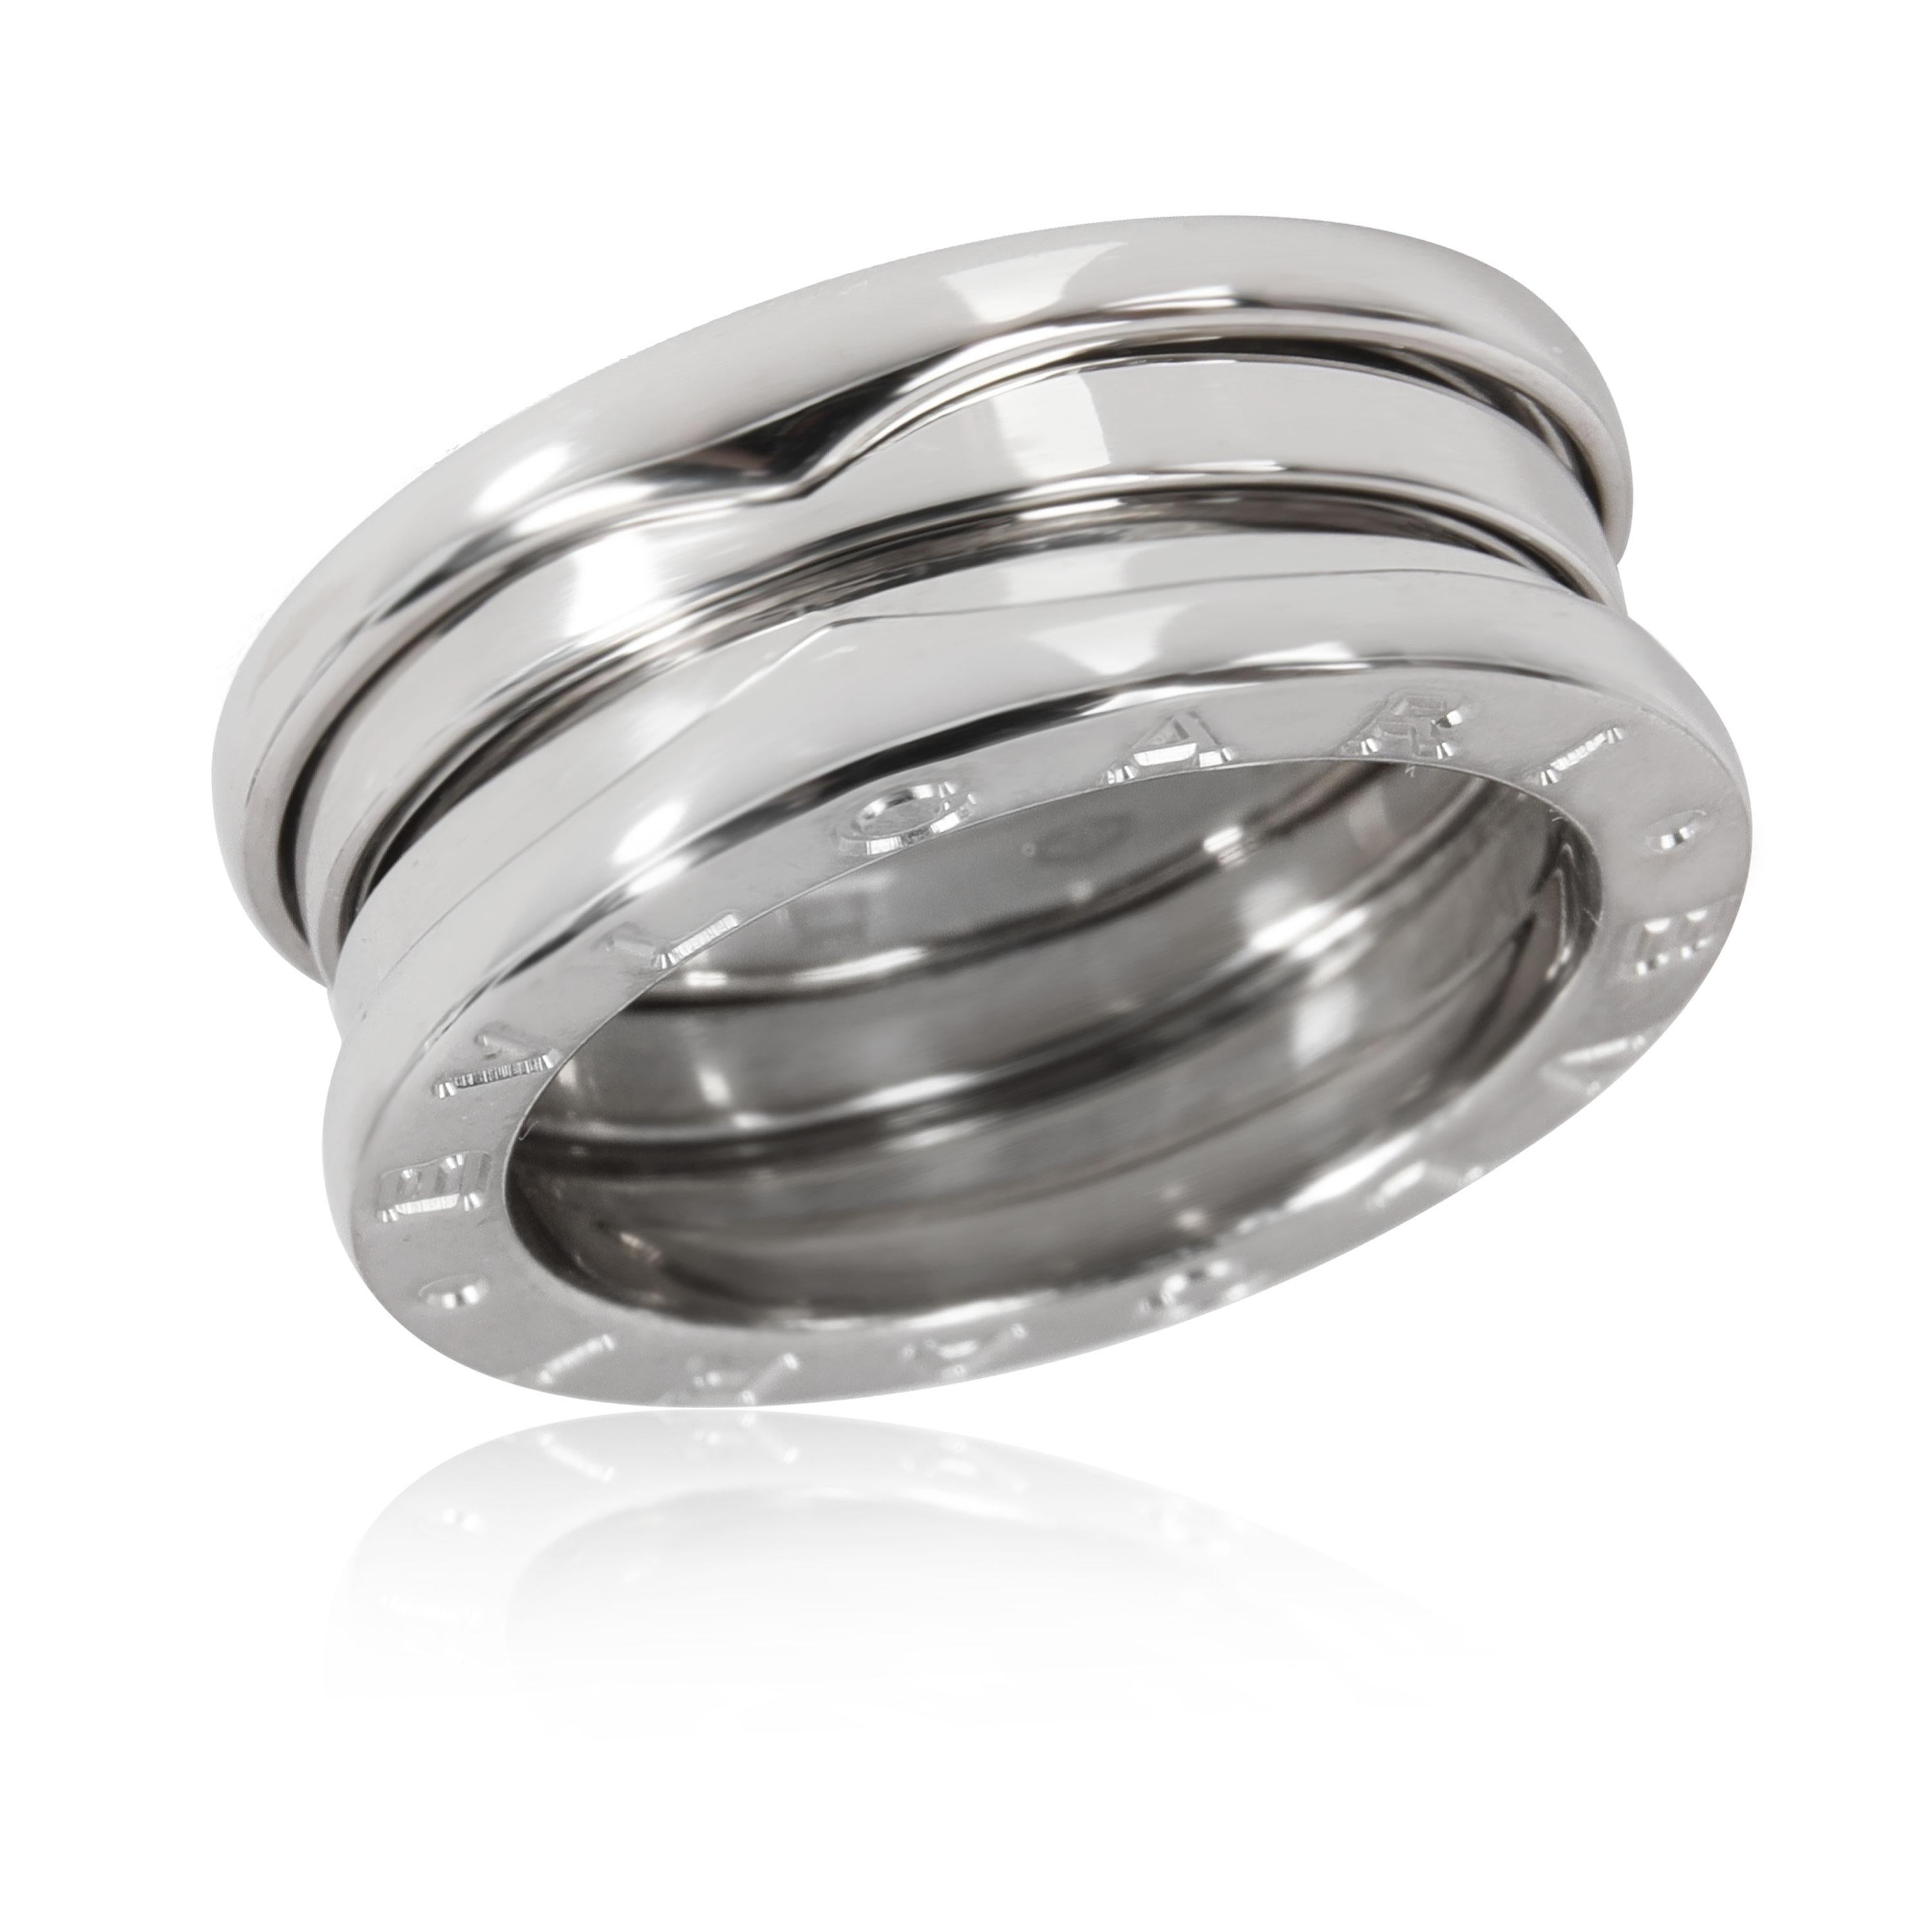 
Bulgari B Zero 1 Ring in 18K White Gold

PRIMARY DETAILS
SKU: 112420
Listing Title: Bulgari B Zero 1 Ring in 18K White Gold
Condition Description: Retails for 2330 USD. In excellent condition and recently polished. Ring size is 50.
Brand: